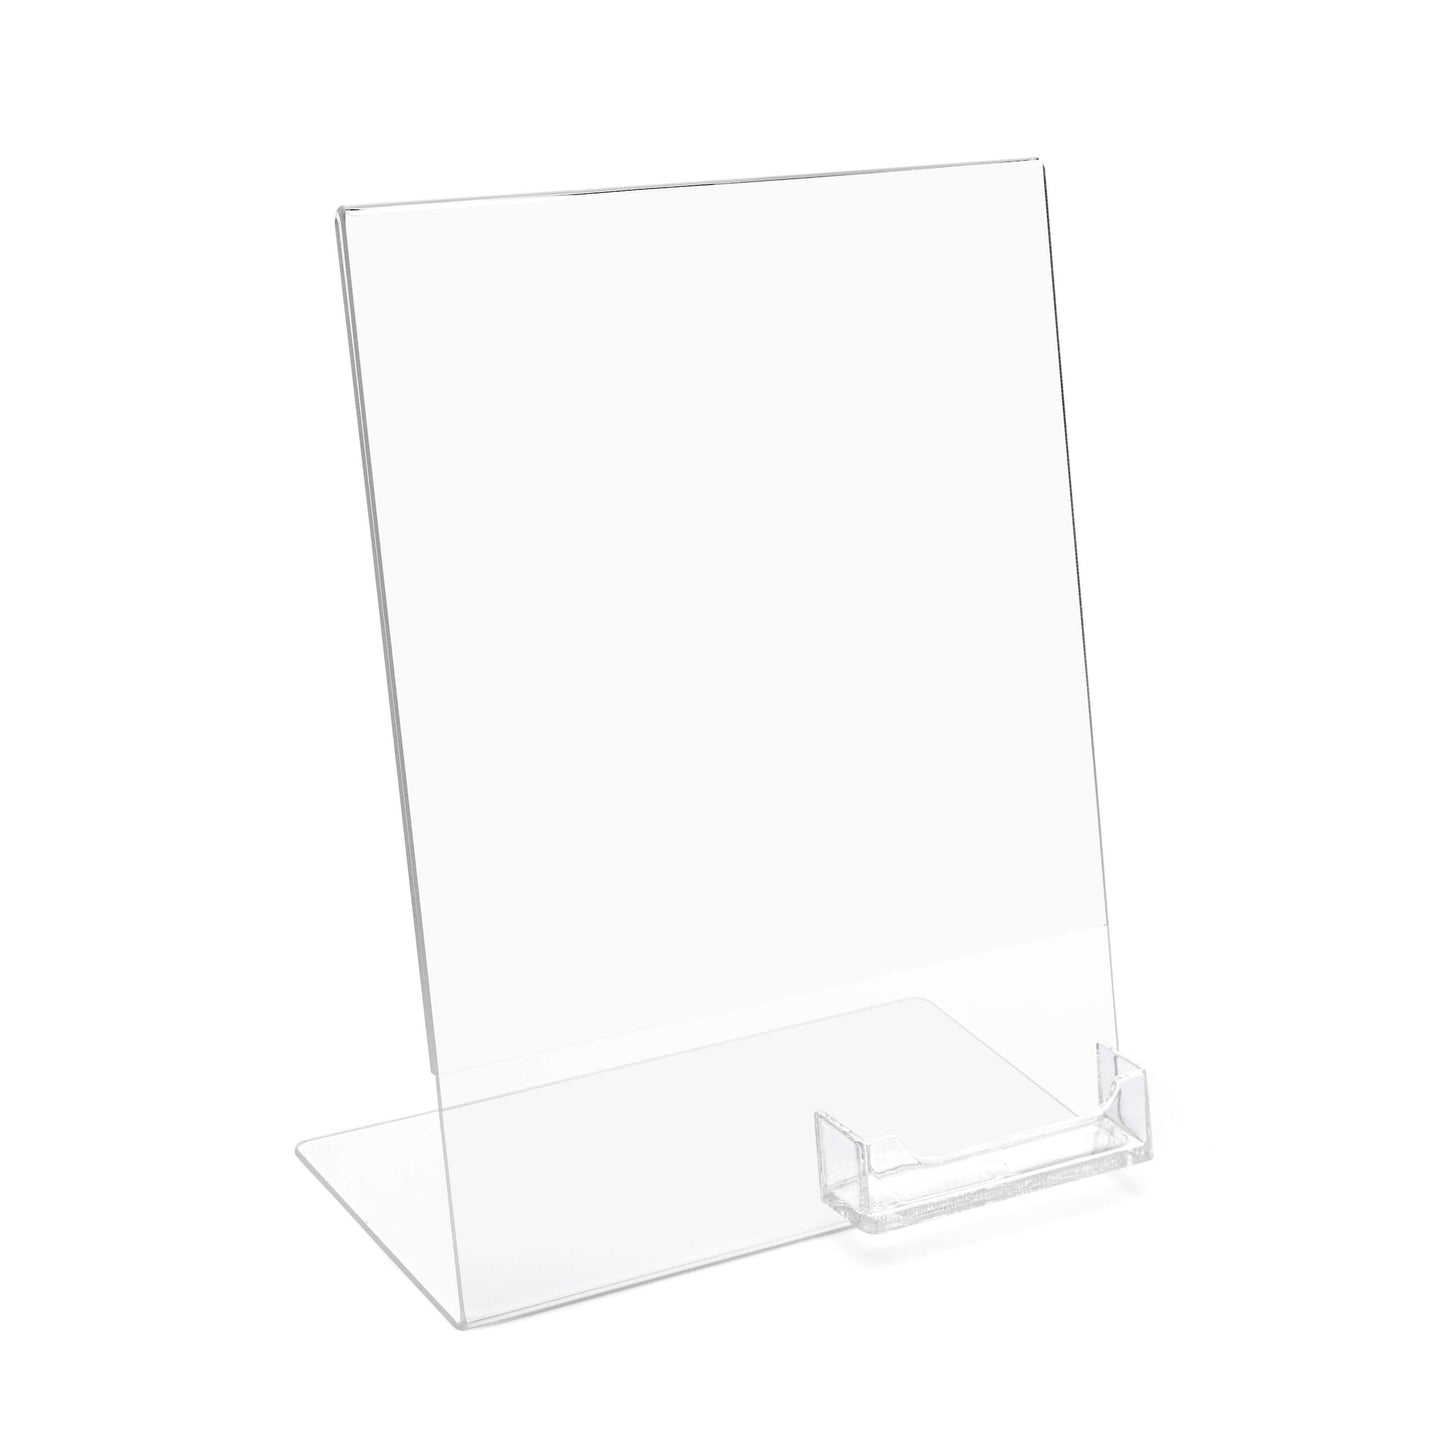 Acrylic Sign Holder with Card Pocket Large